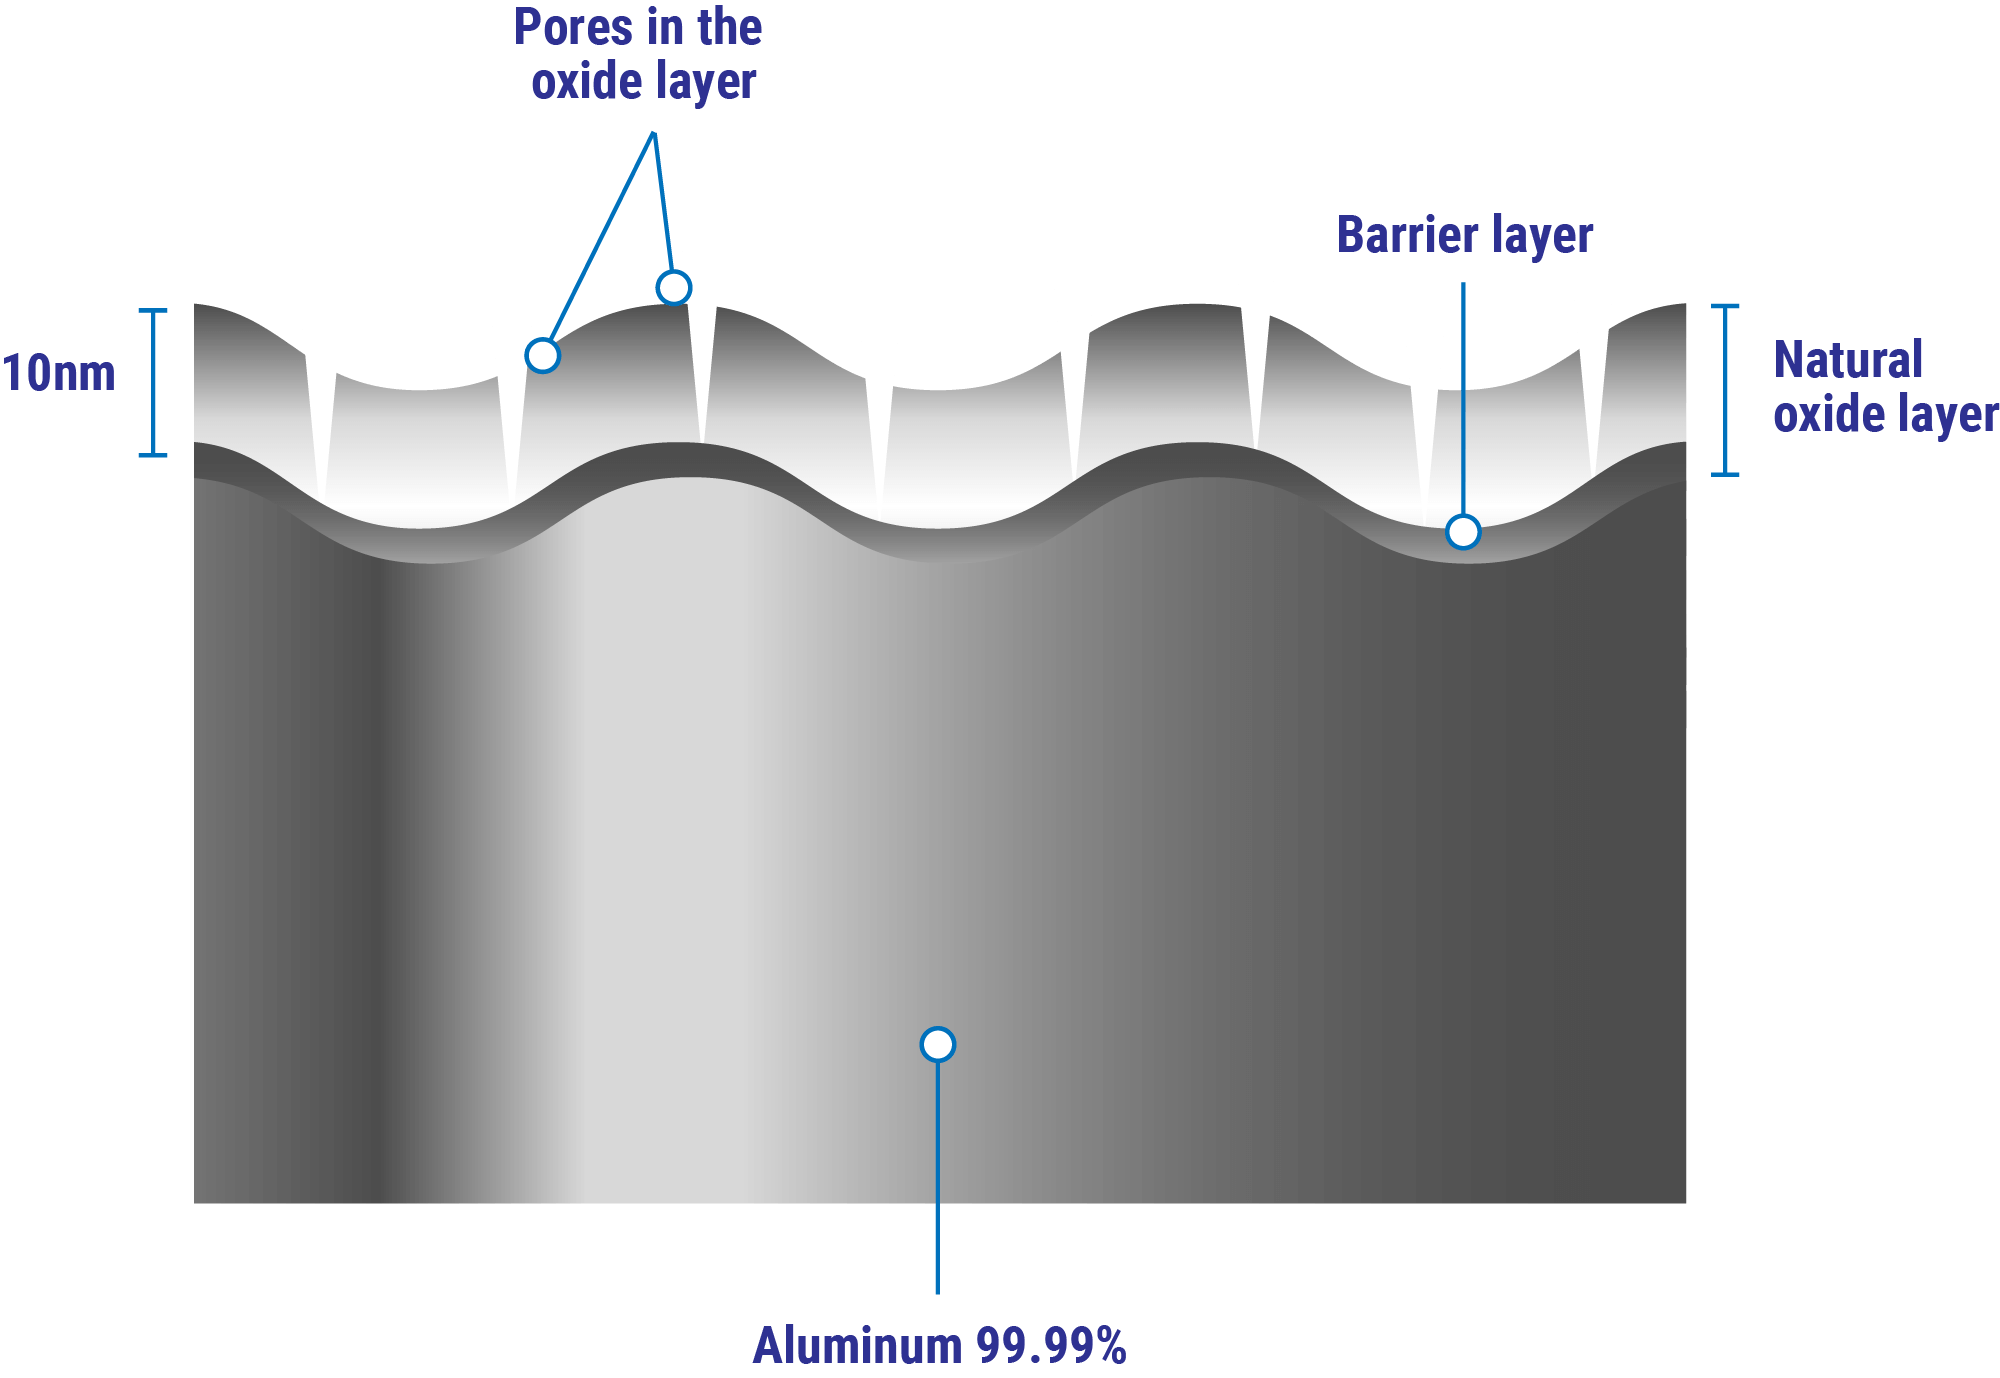 Figure 1. Schematic of the passive oxide film that forms on aluminum.